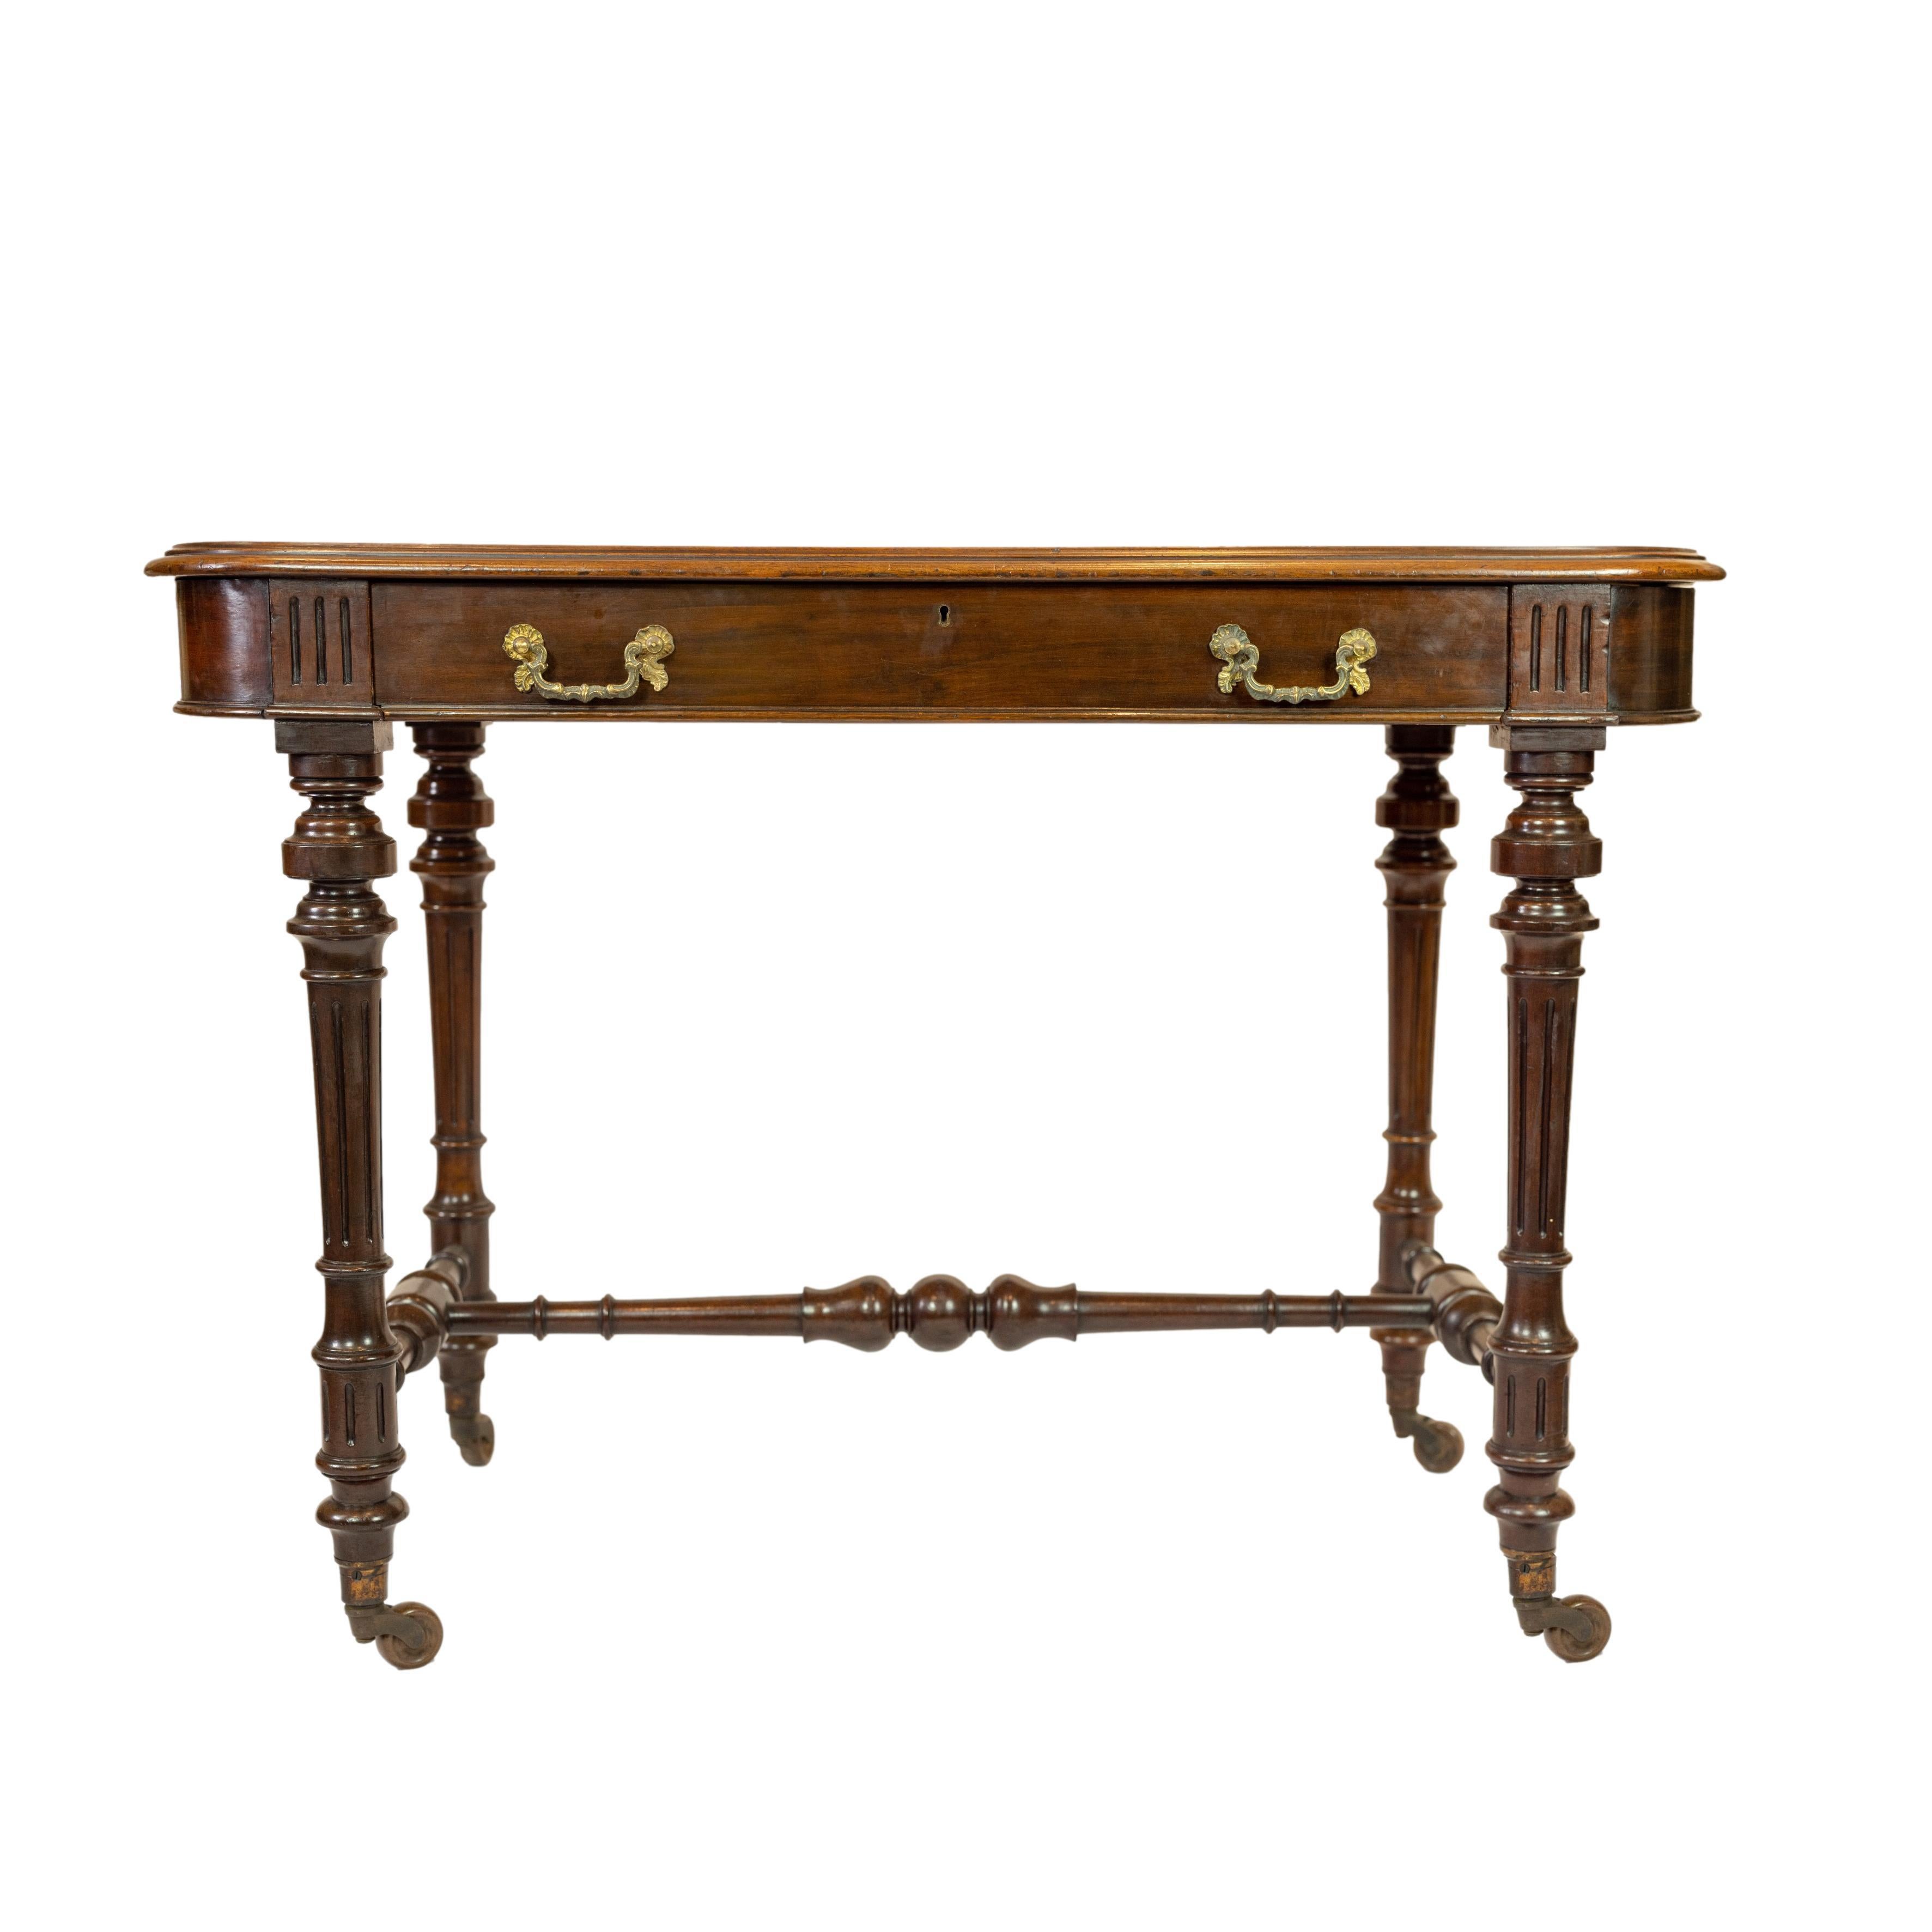 19th Century William IV Mahogany Writing Desk with Tooled Leather Top, English, ca. 1835